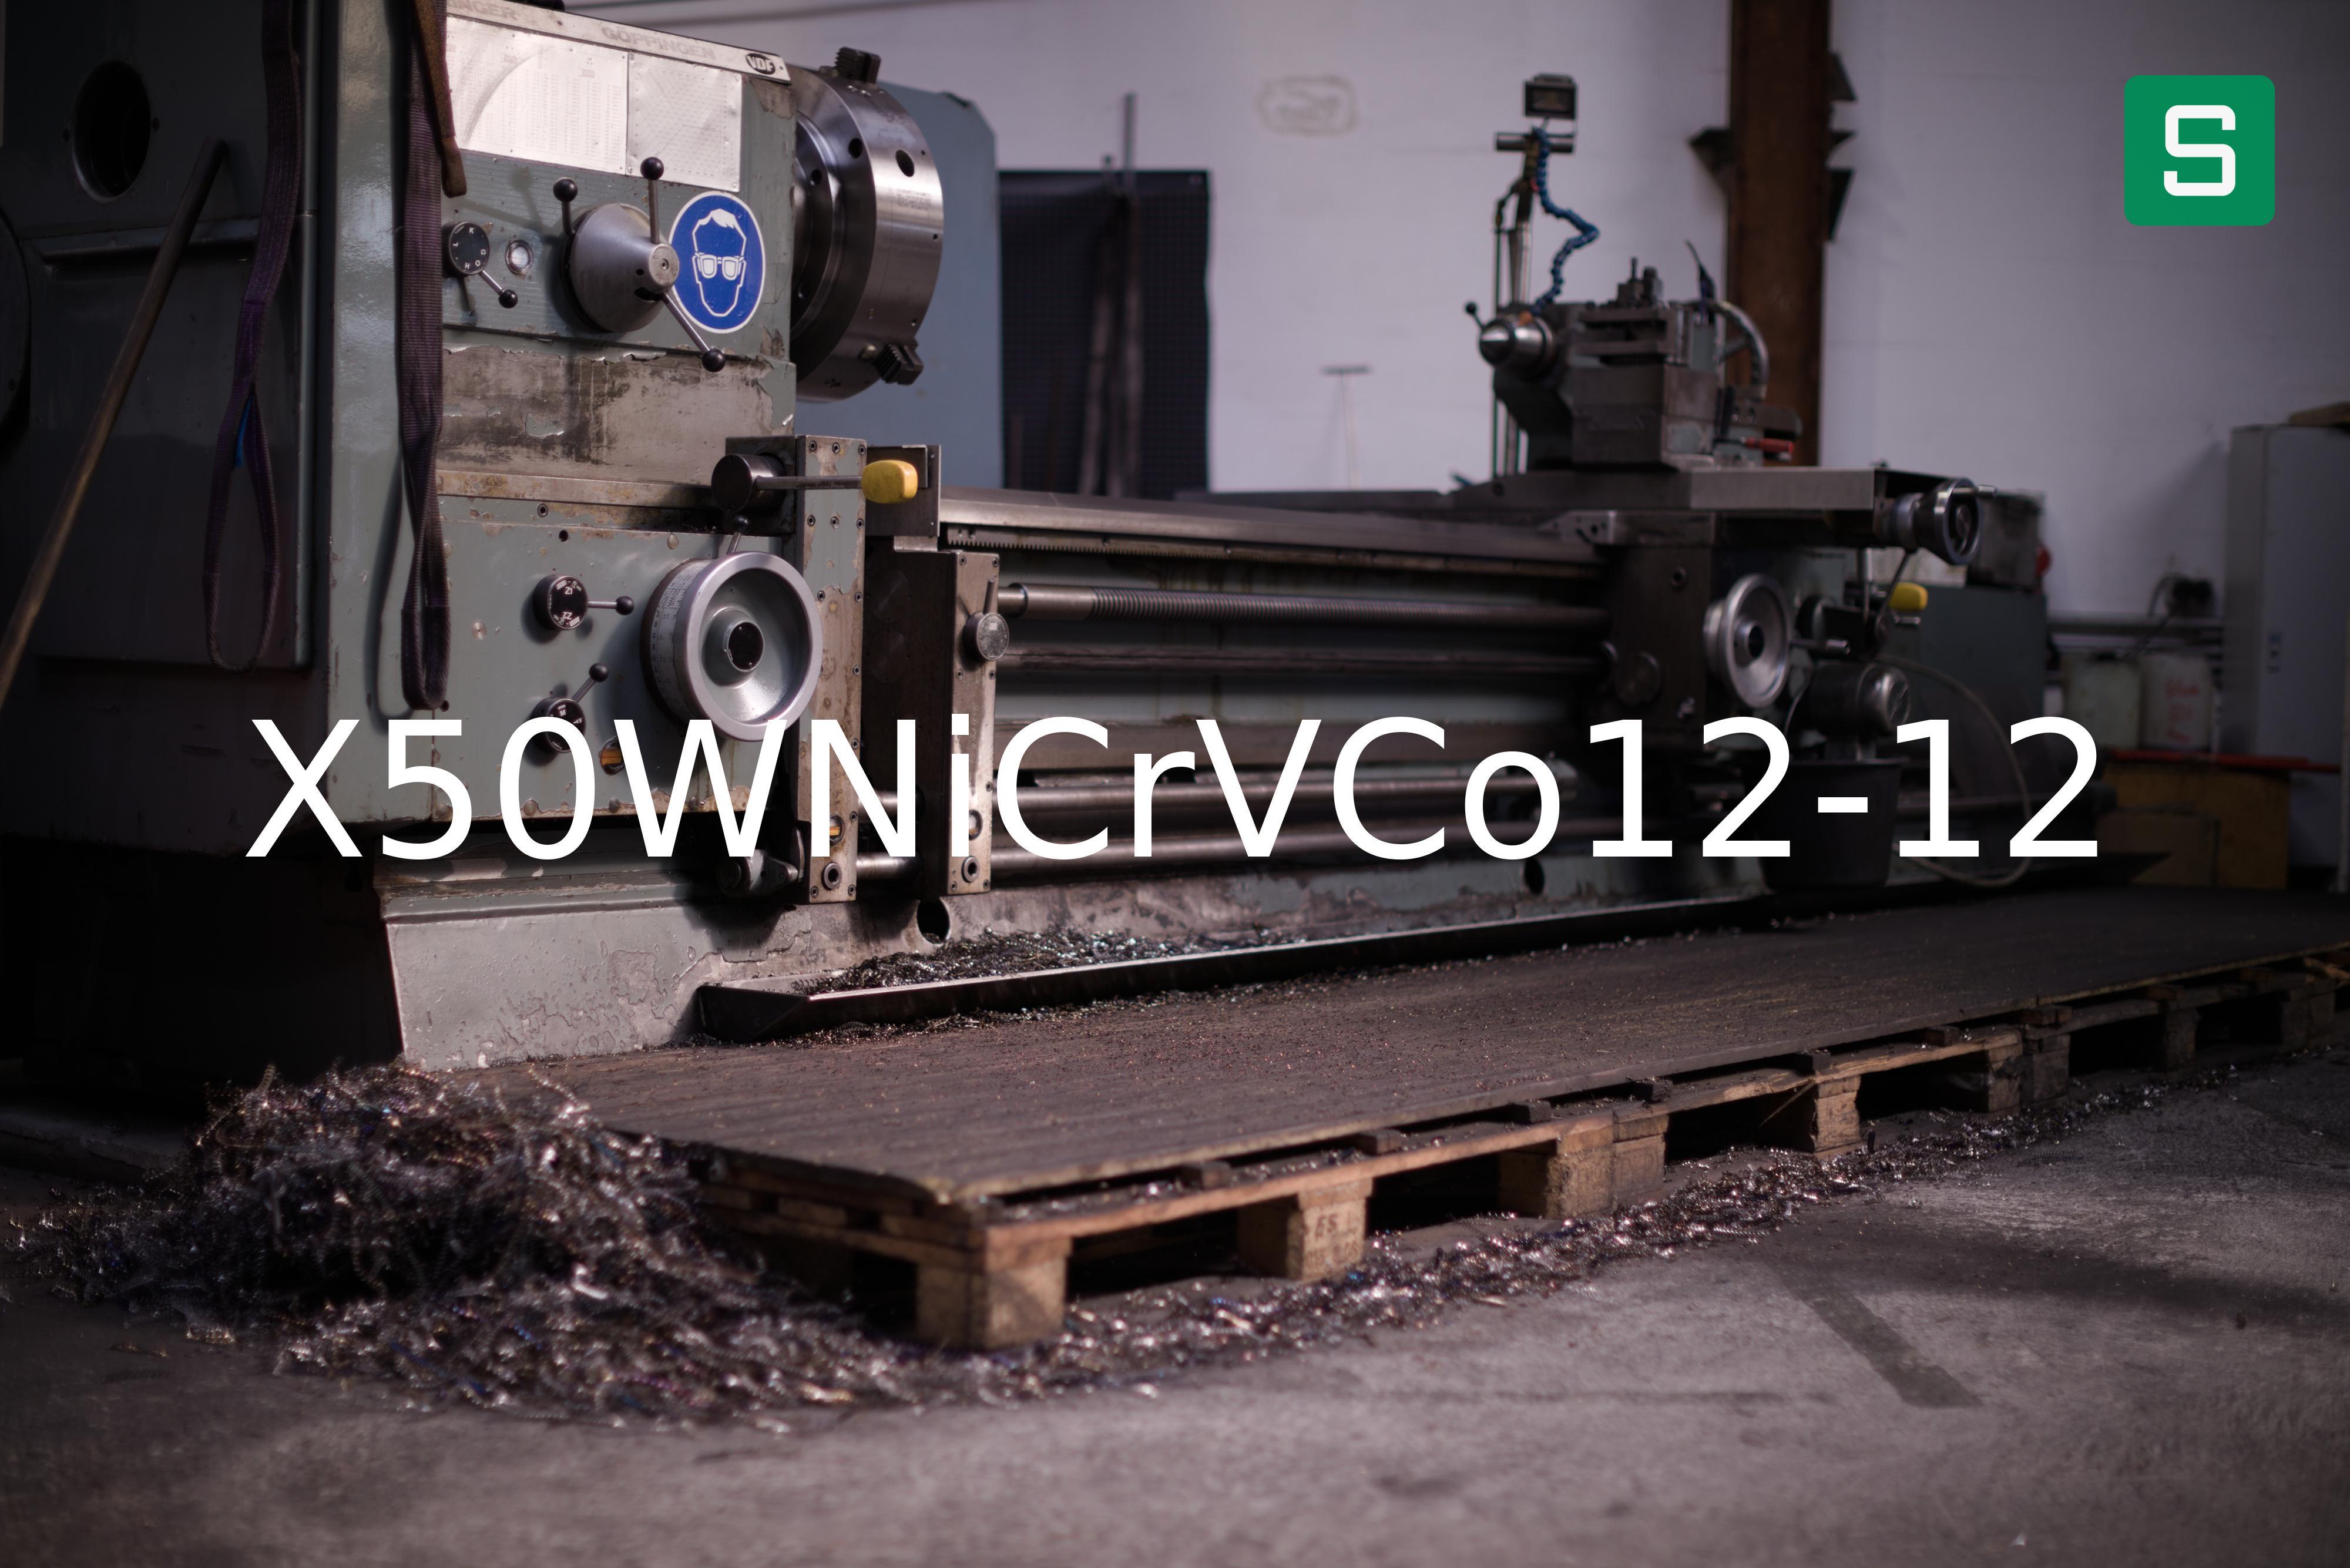 Steel Material: X50WNiCrVCo12-12